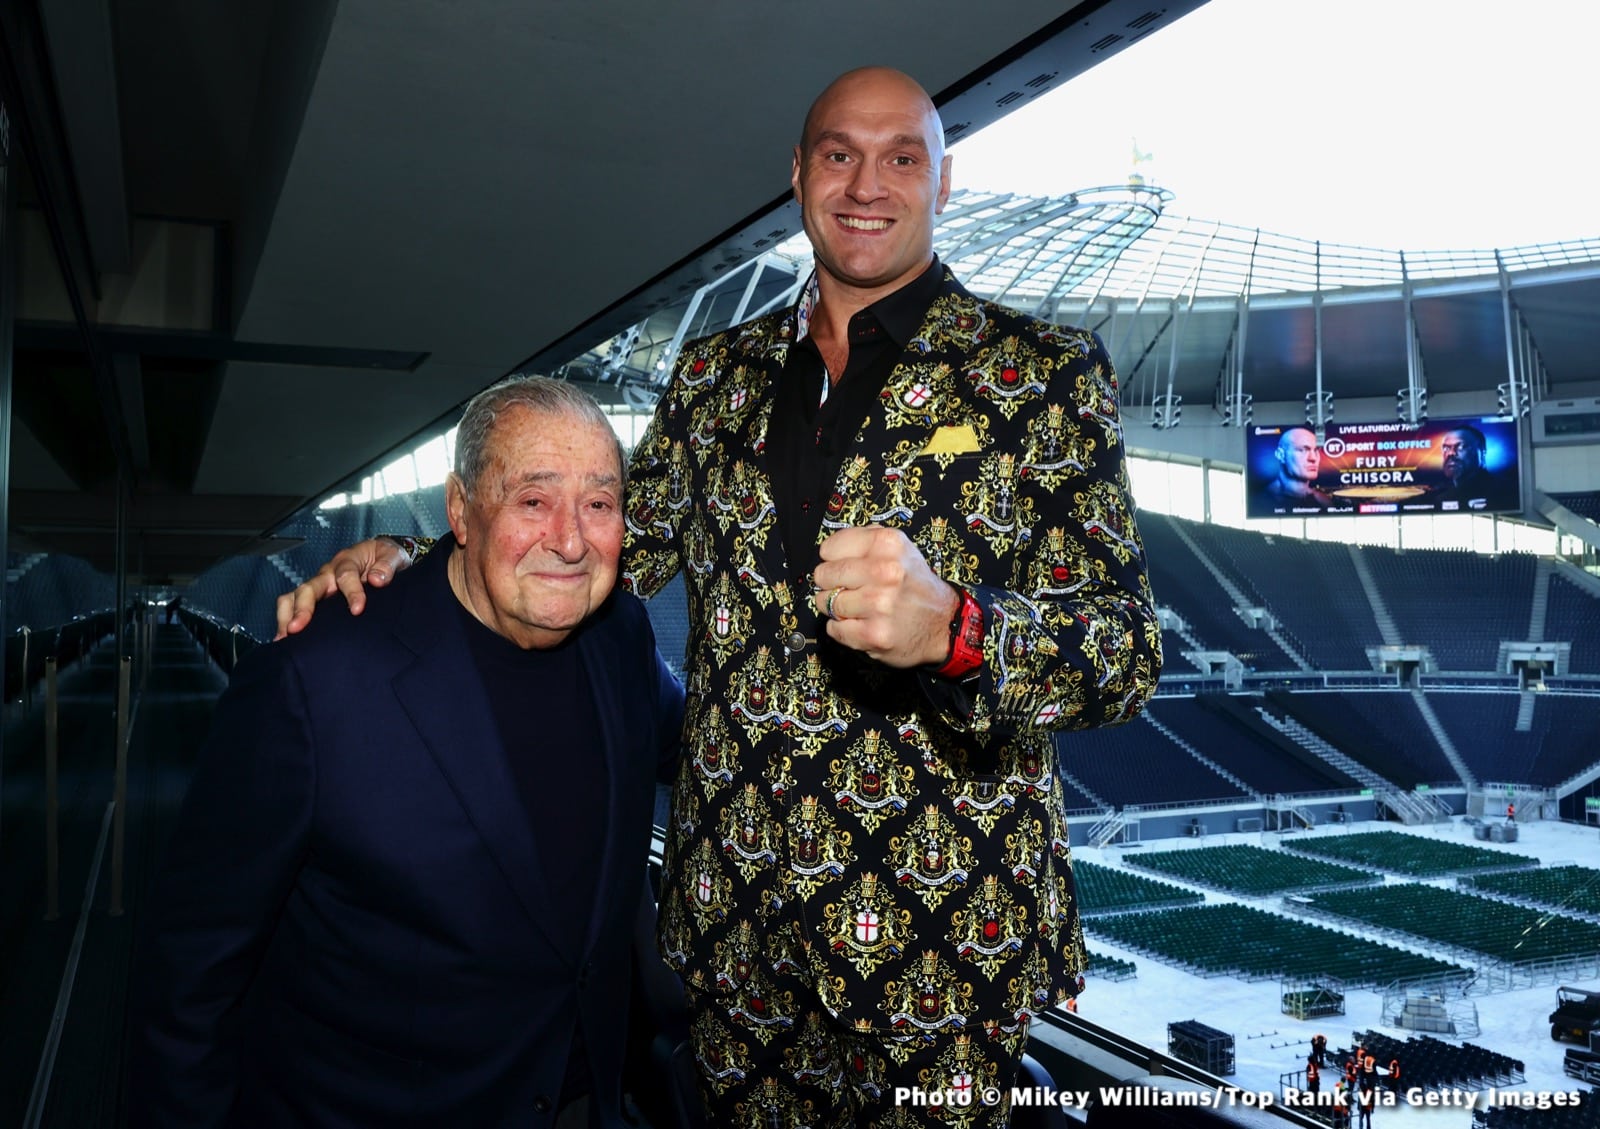 Tyson Fury and Oleksandr Usyk to fight at Wembley Stadium on April 29th - The Punch Junkie